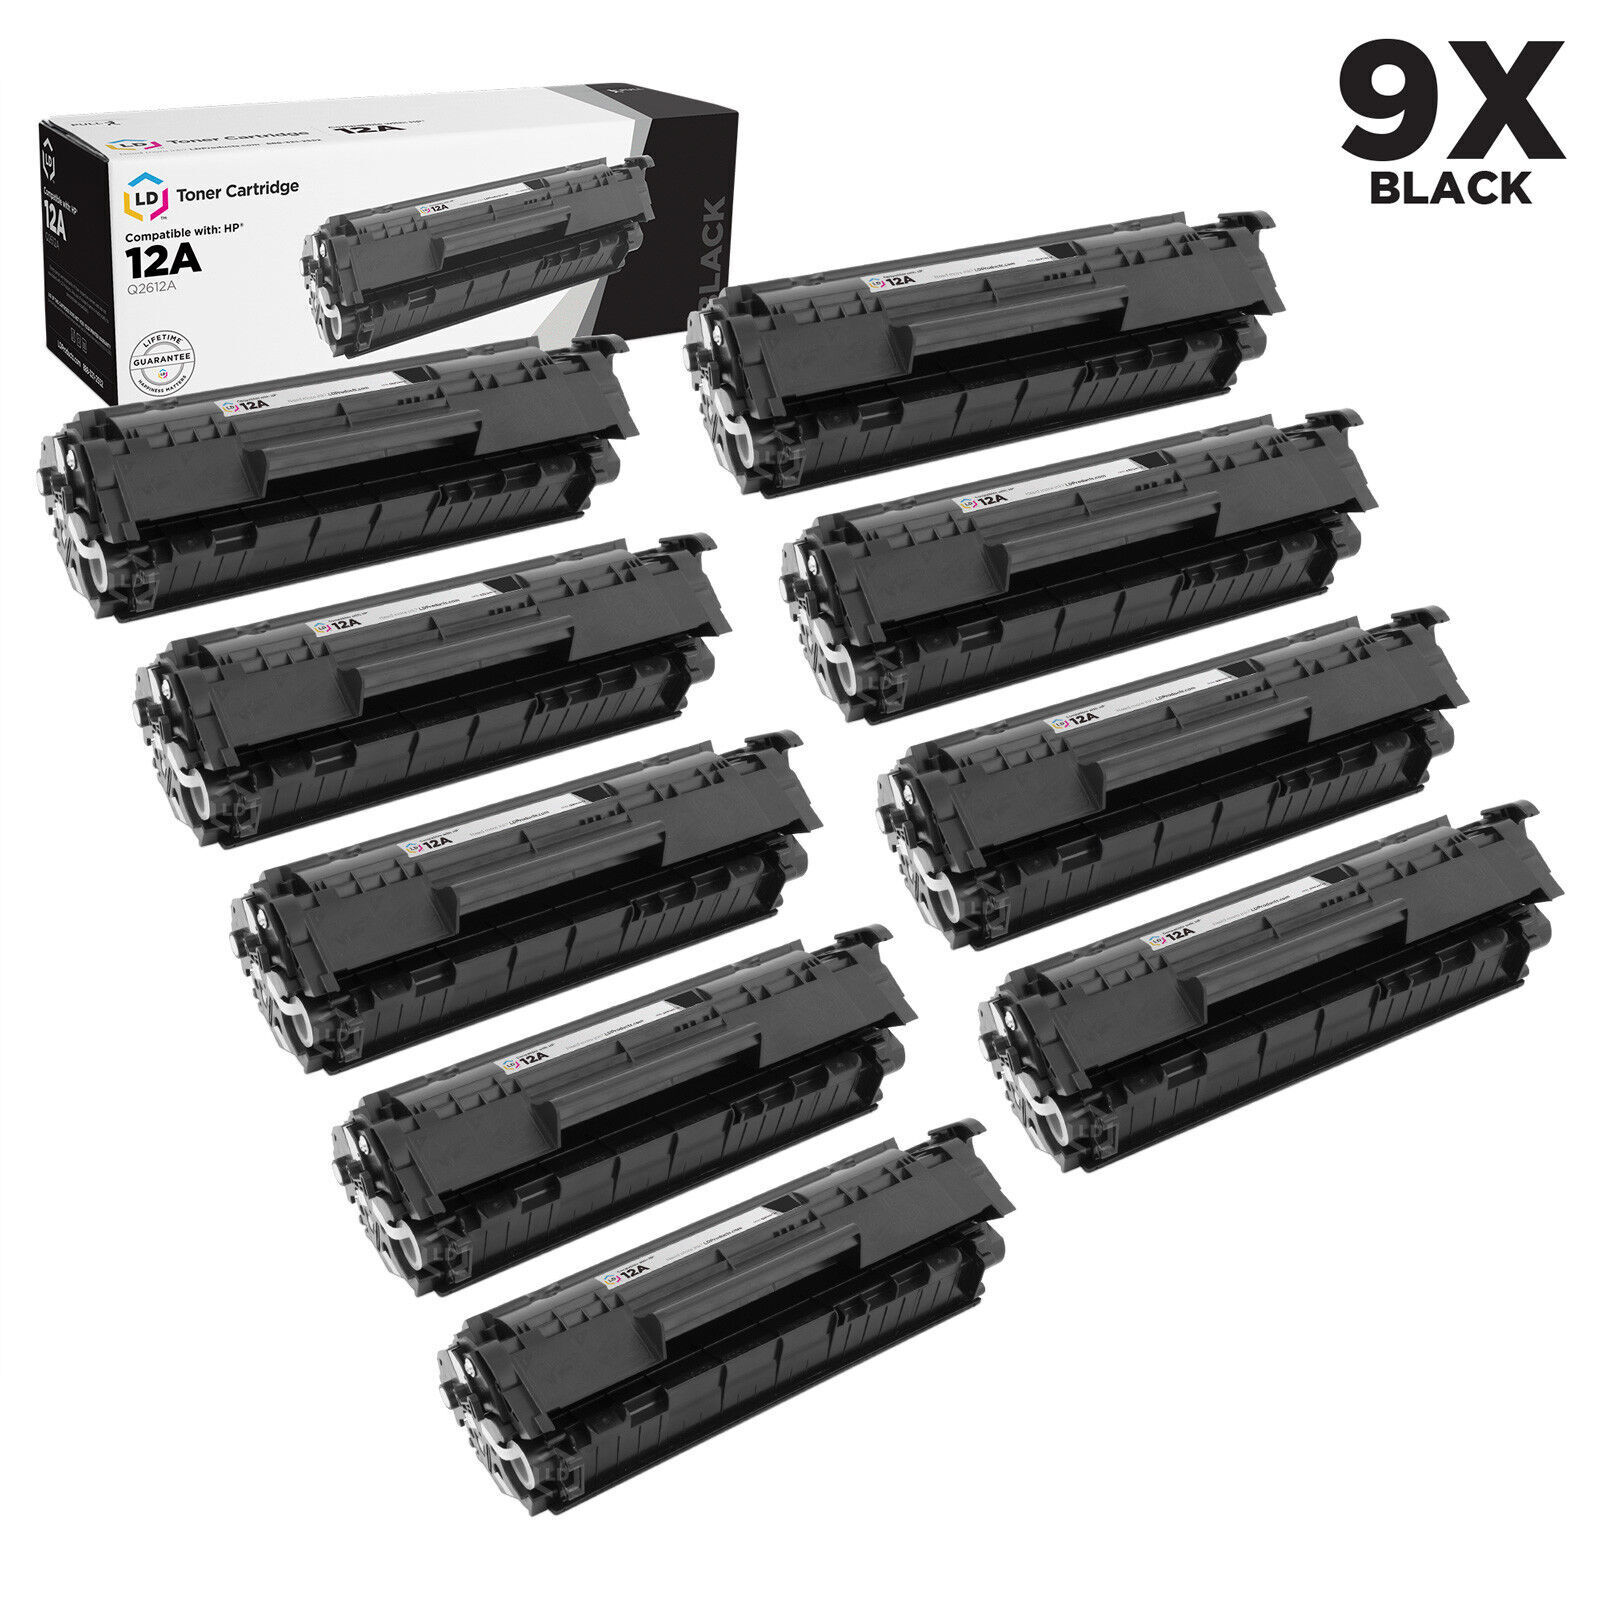 LD Products 9PK Comp HP 12A Black Toner Cartridge for Q2612A LaserJet 1022nw